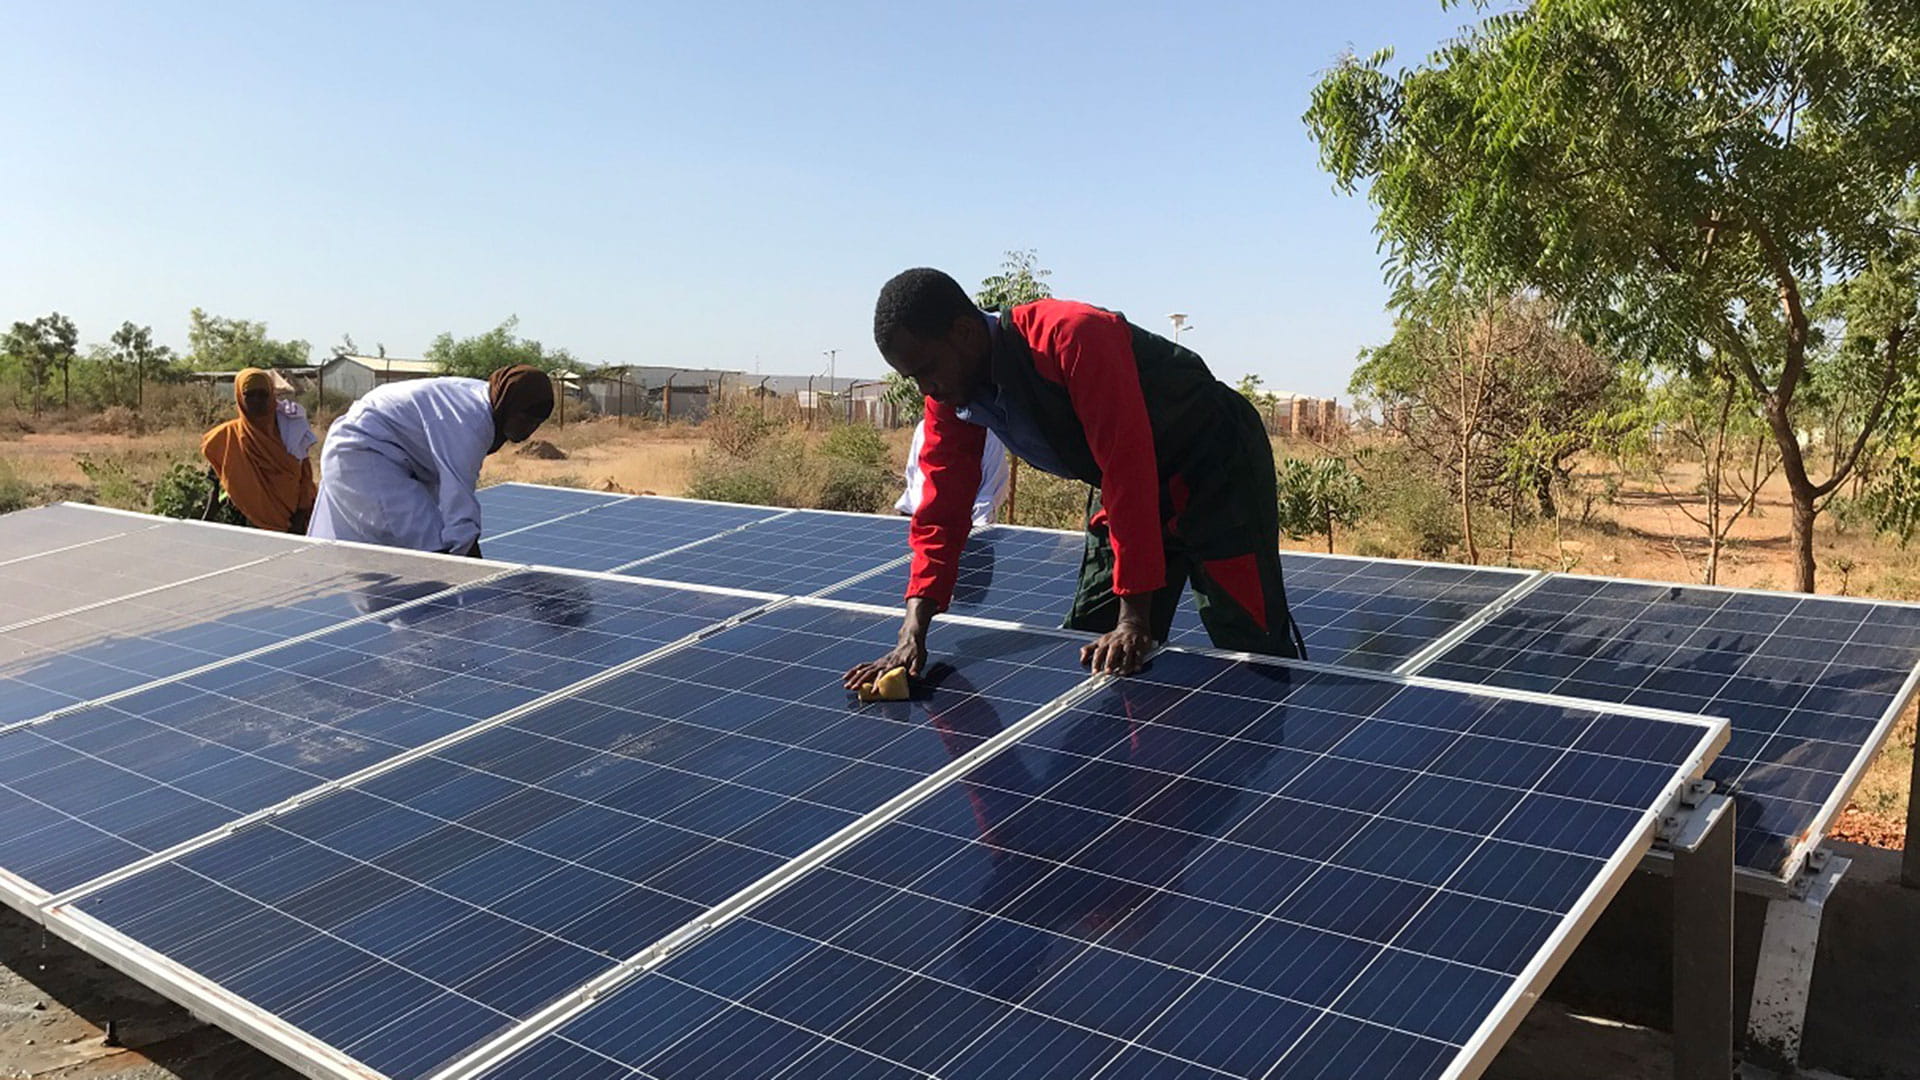 Lead Solar Technician cleans the panels to ensure they are absorbing as much sun